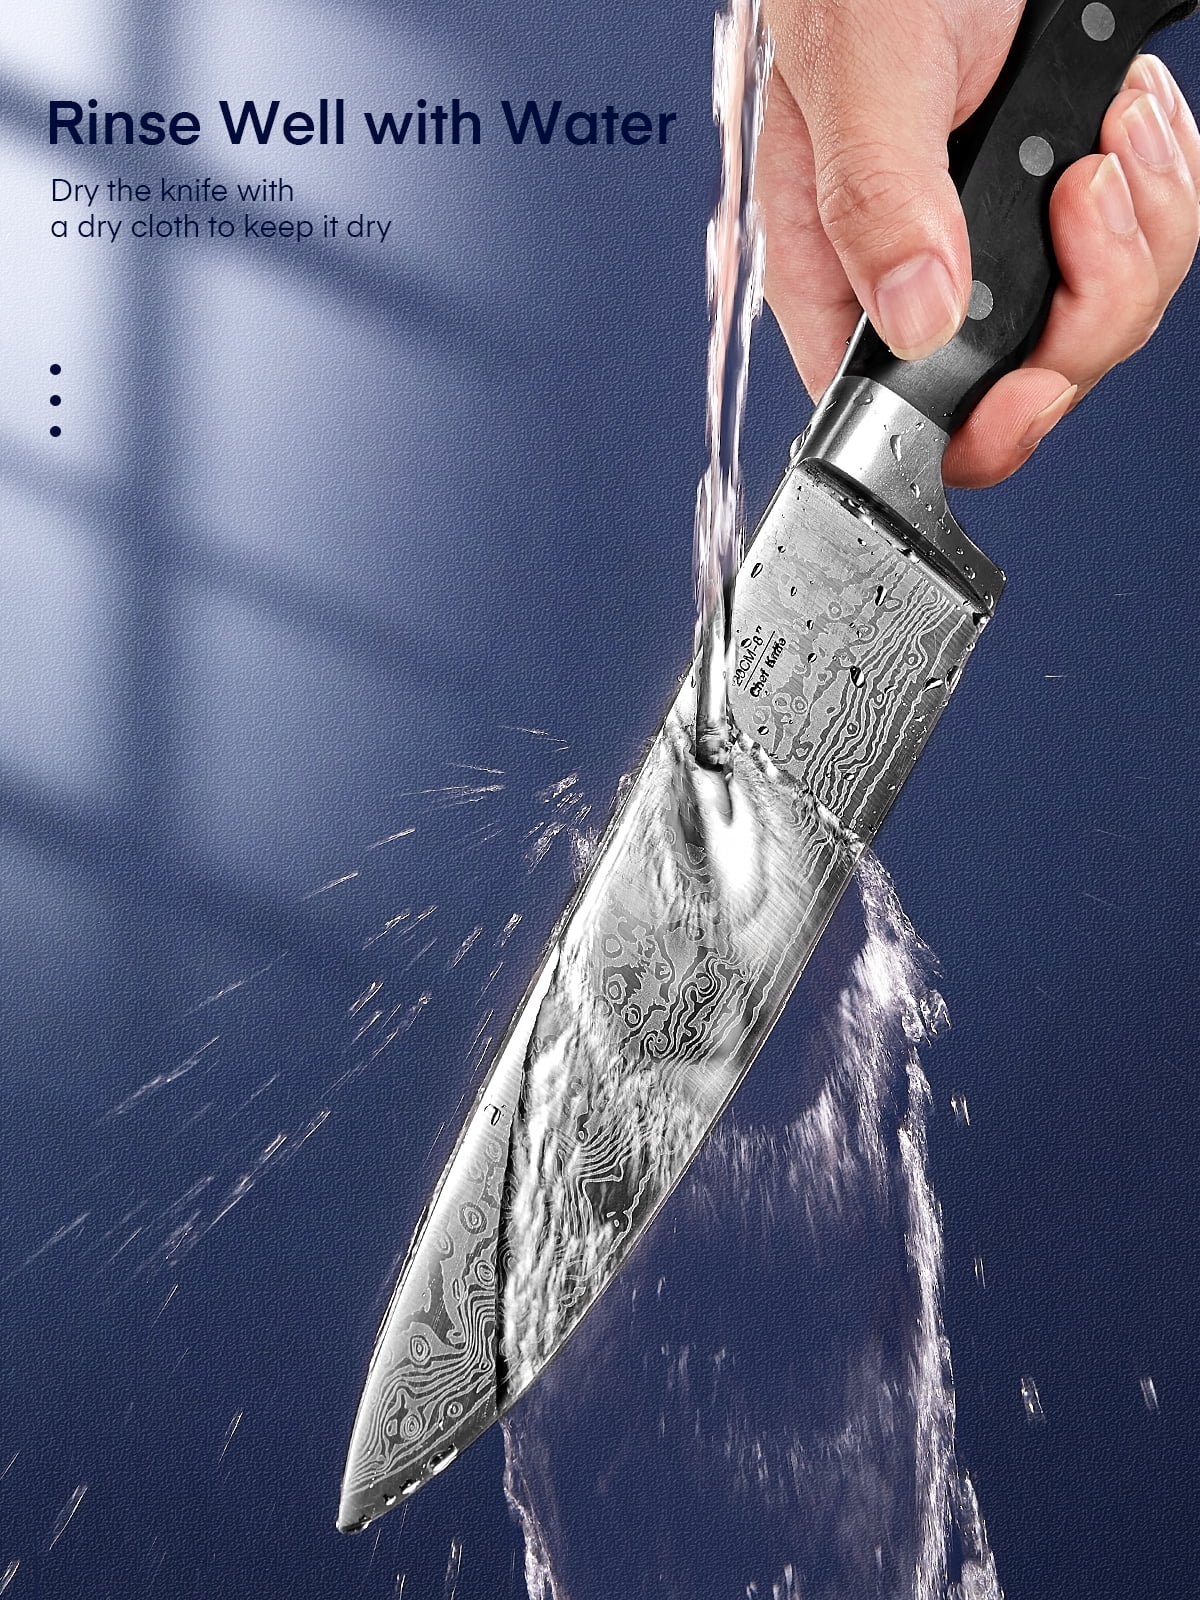 D.Perlla - Knife Set (2 stores) see best prices now »